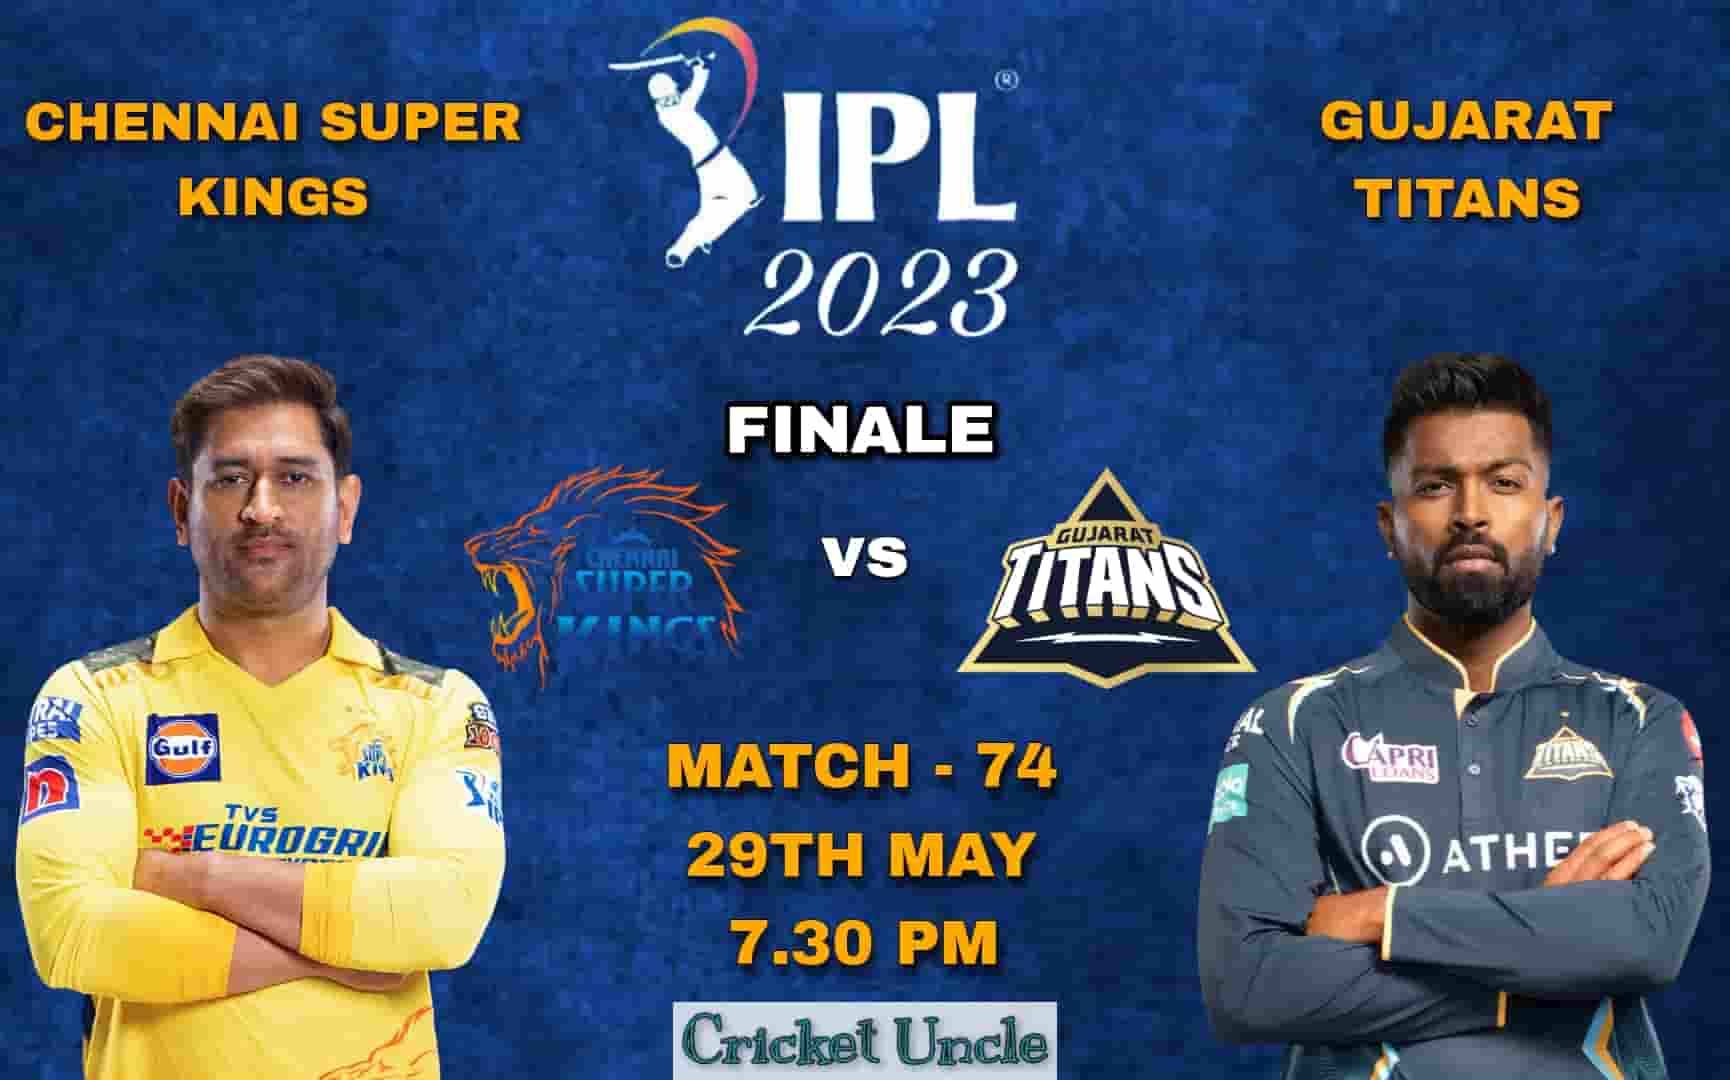 Poster of IPL 2023 Finale Match - 74 between Chennai Super Kings and Gujarat Titans CSK vs GT